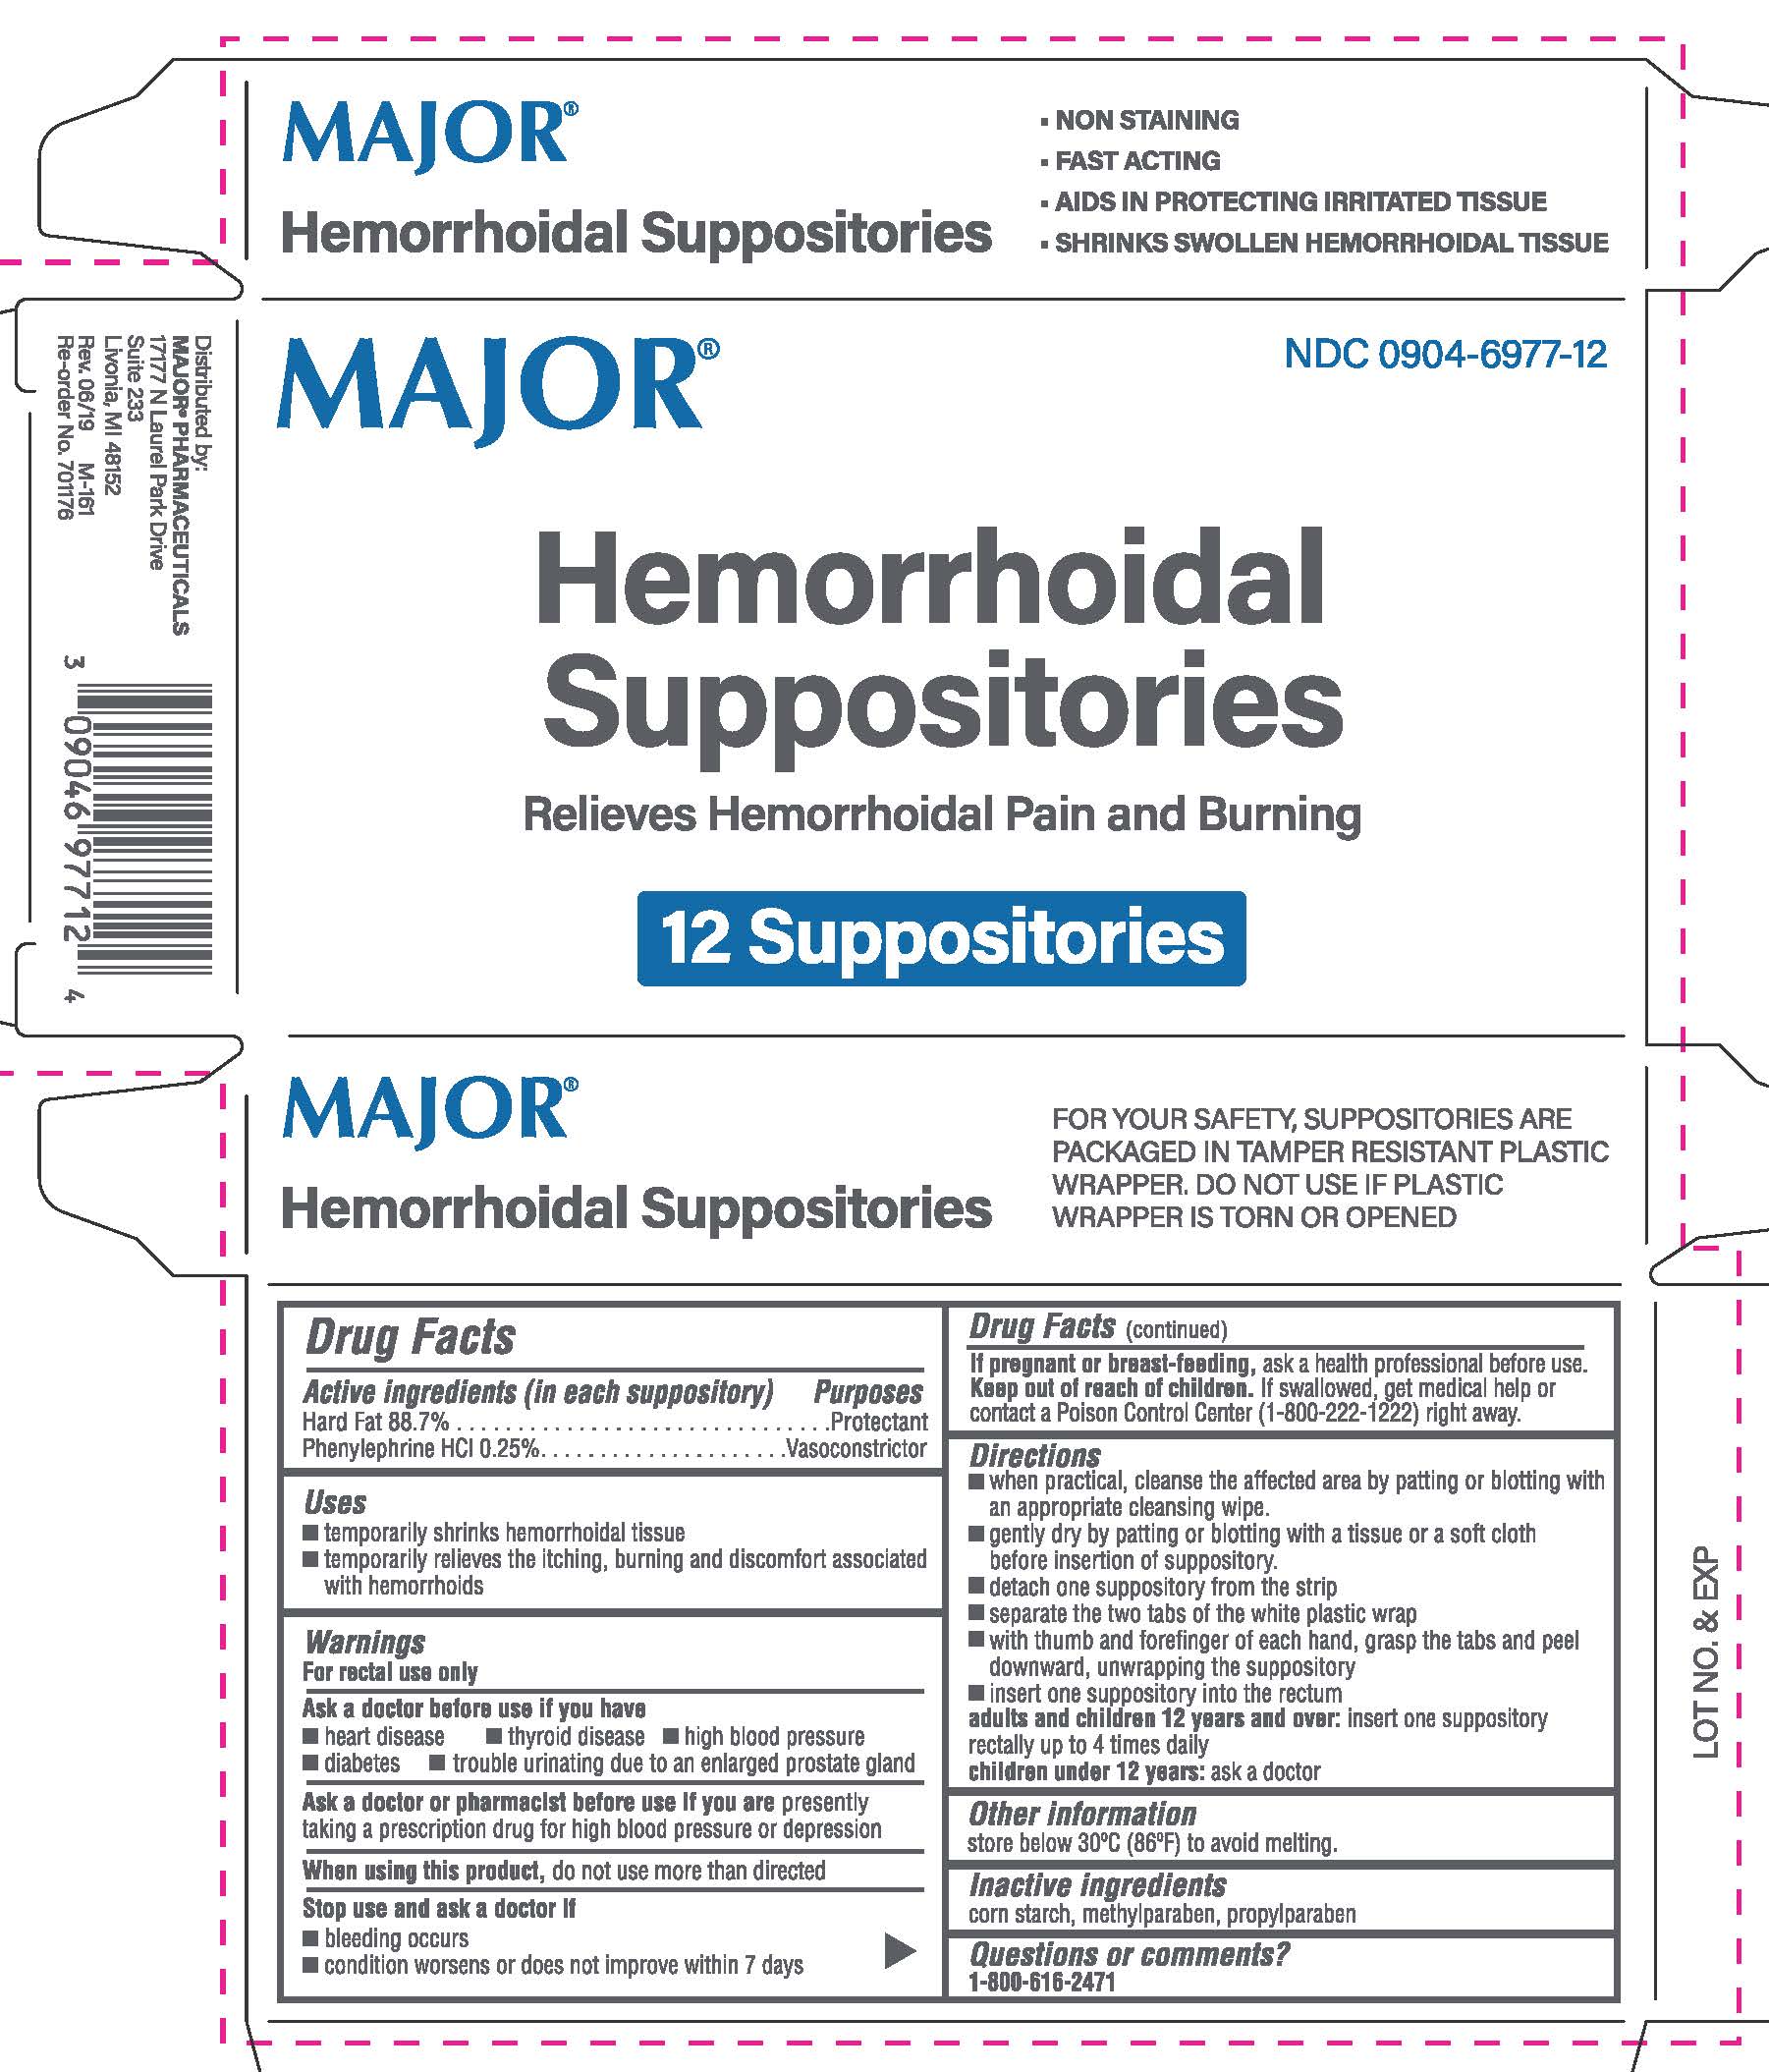 Corect Haemorrhoidal Suppositories - Meridian